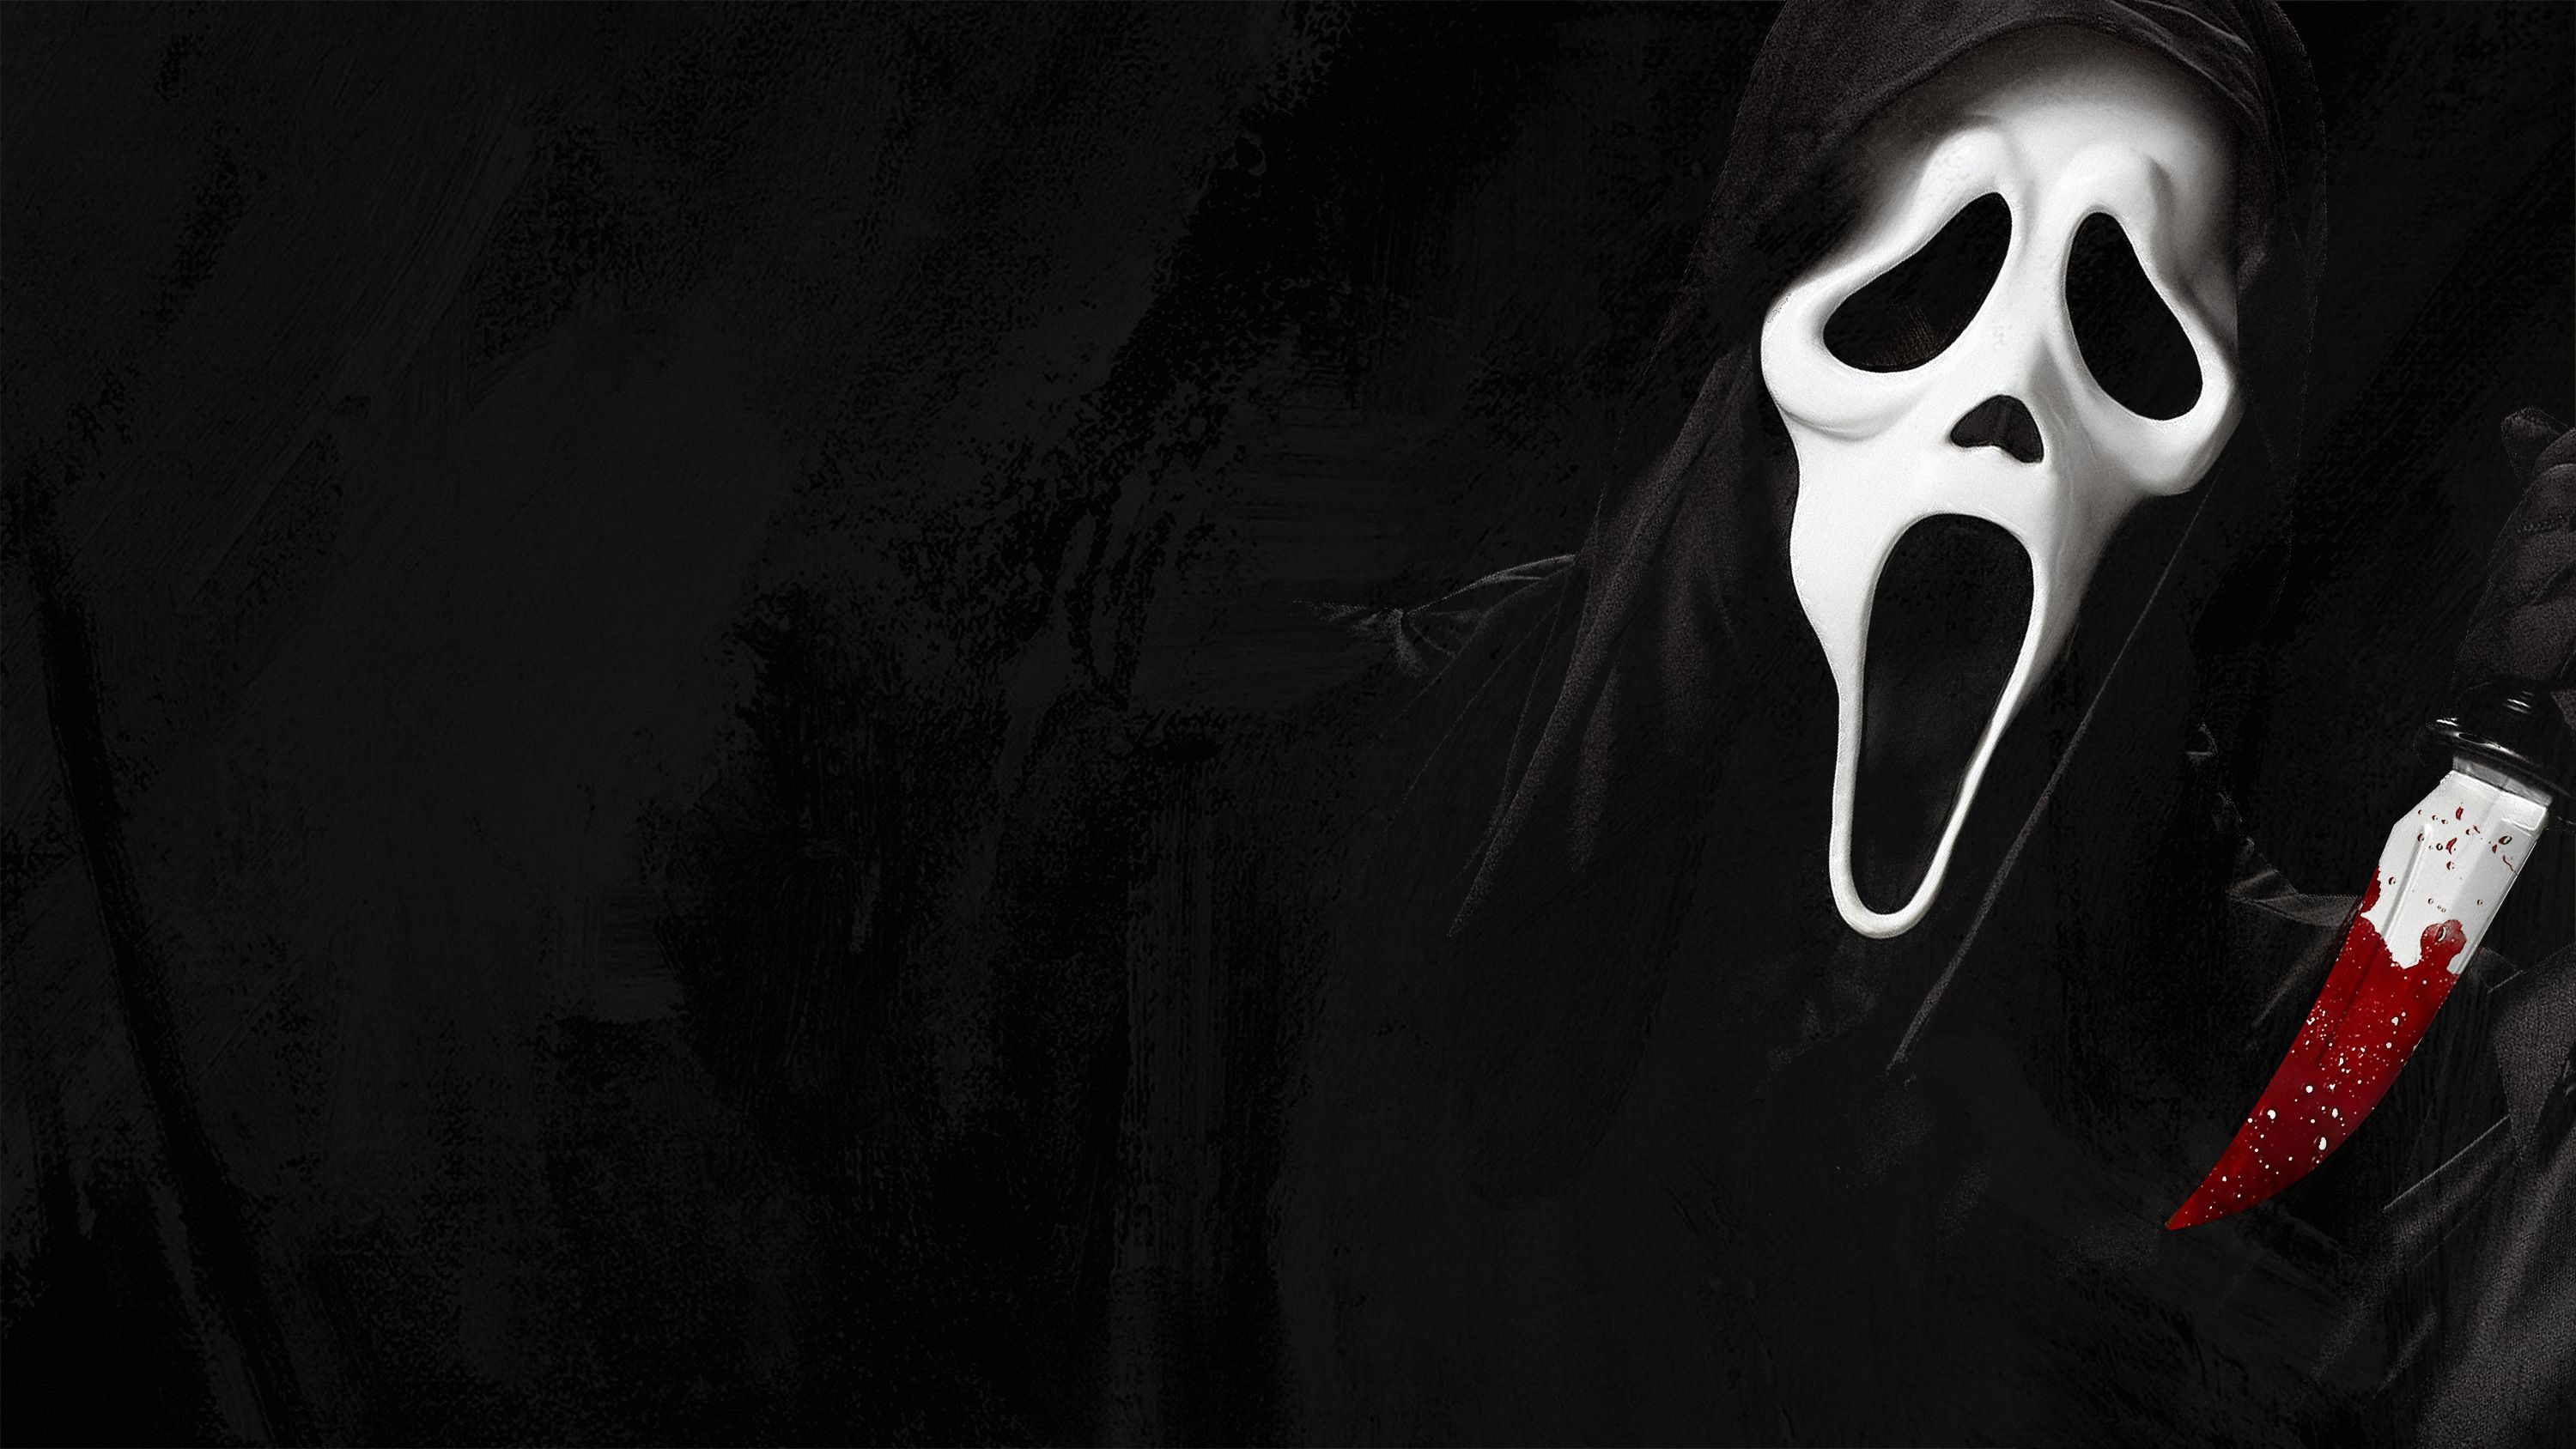 Background Scream Wallpaper Discover more American Character Developed  in 2023  Halloween wallpaper backgrounds Scary wallpaper Halloween  wallpaper iphone backgrounds